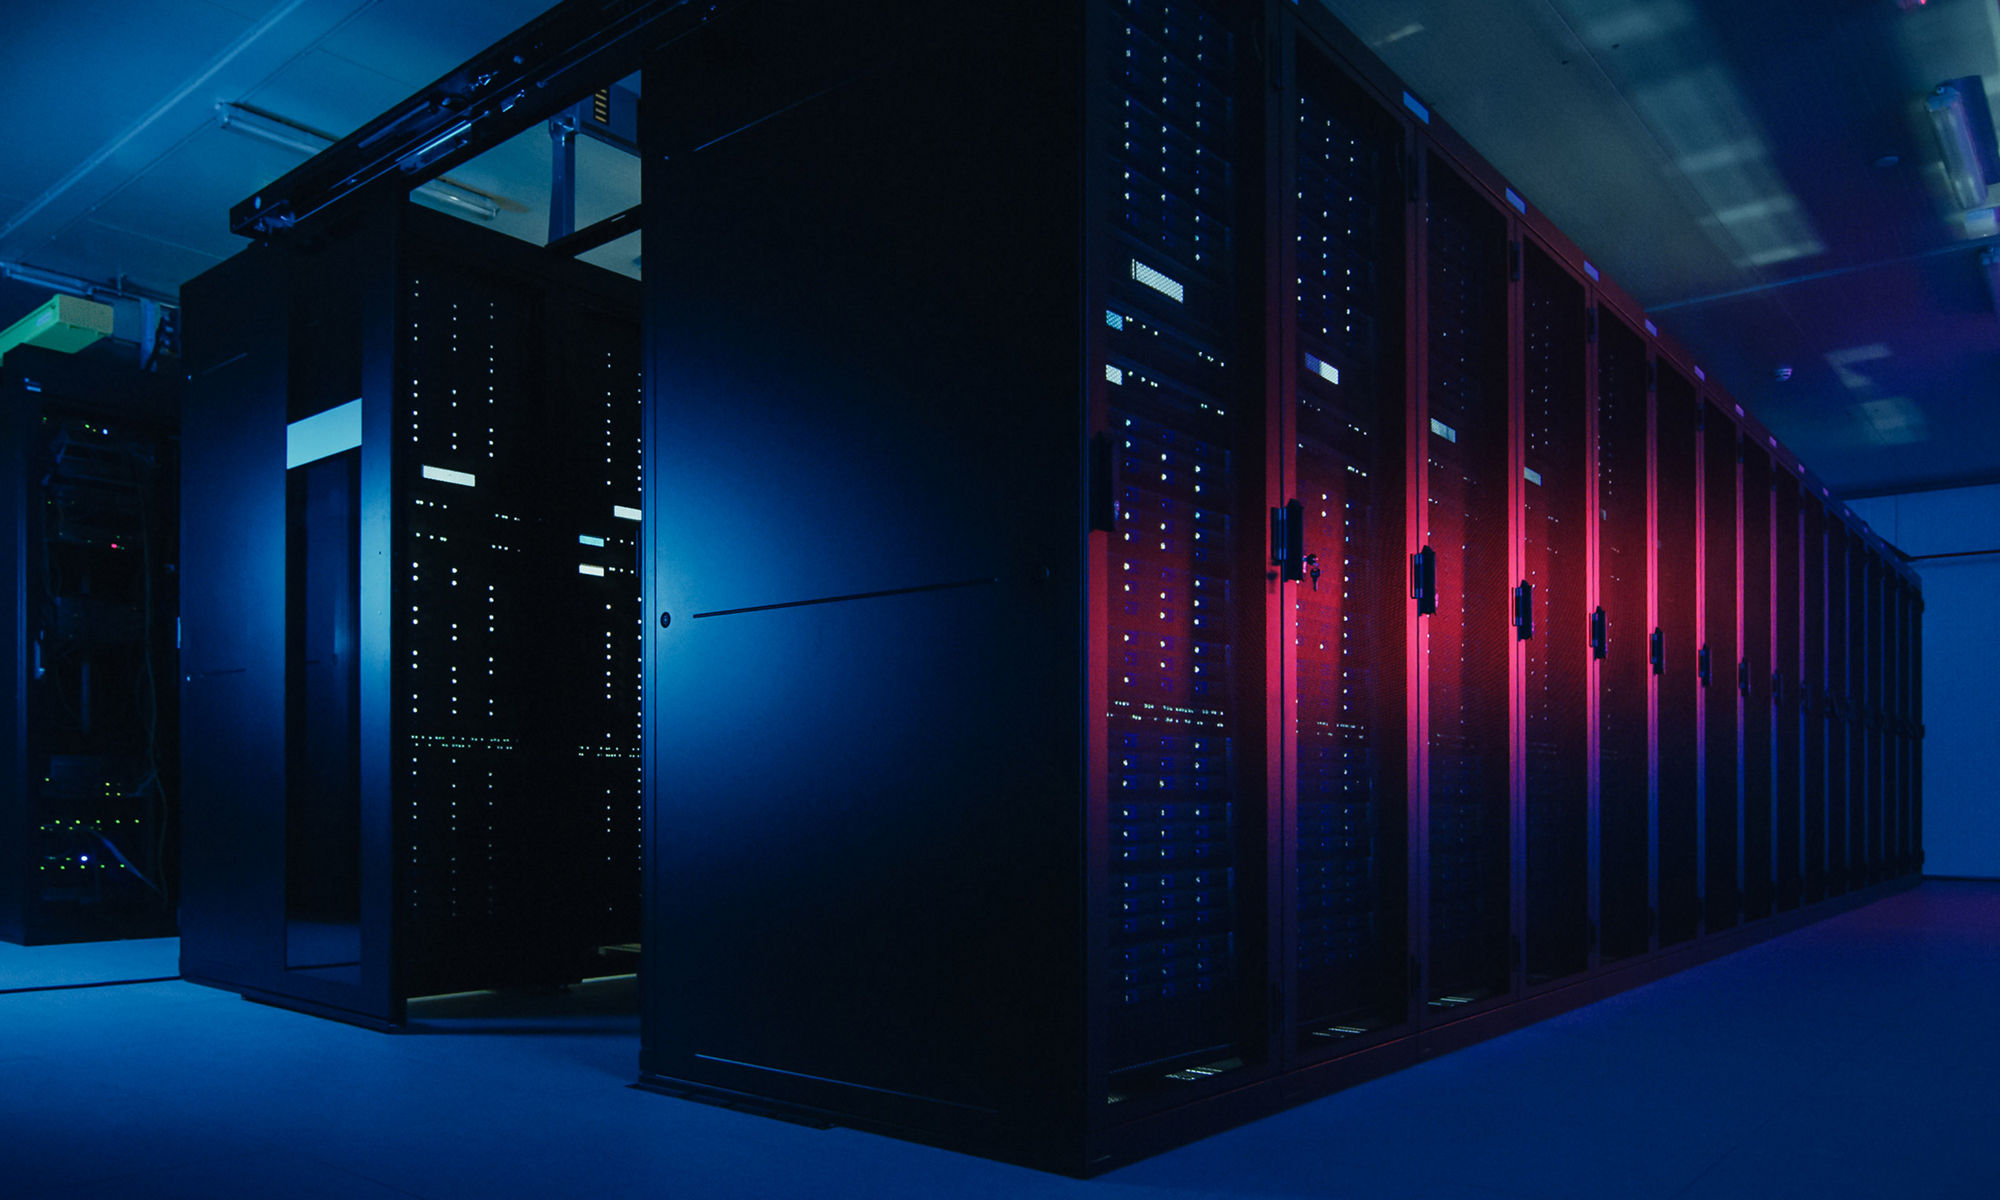 Shot of Data Center With Multiple Rows of Fully Operational Server Racks. Modern Telecommunications, Cloud Computing, Artificial Intelligence, Database, Supercomputer Technology Concept. Shot in Dark with Neon Blue, Pink Lights.